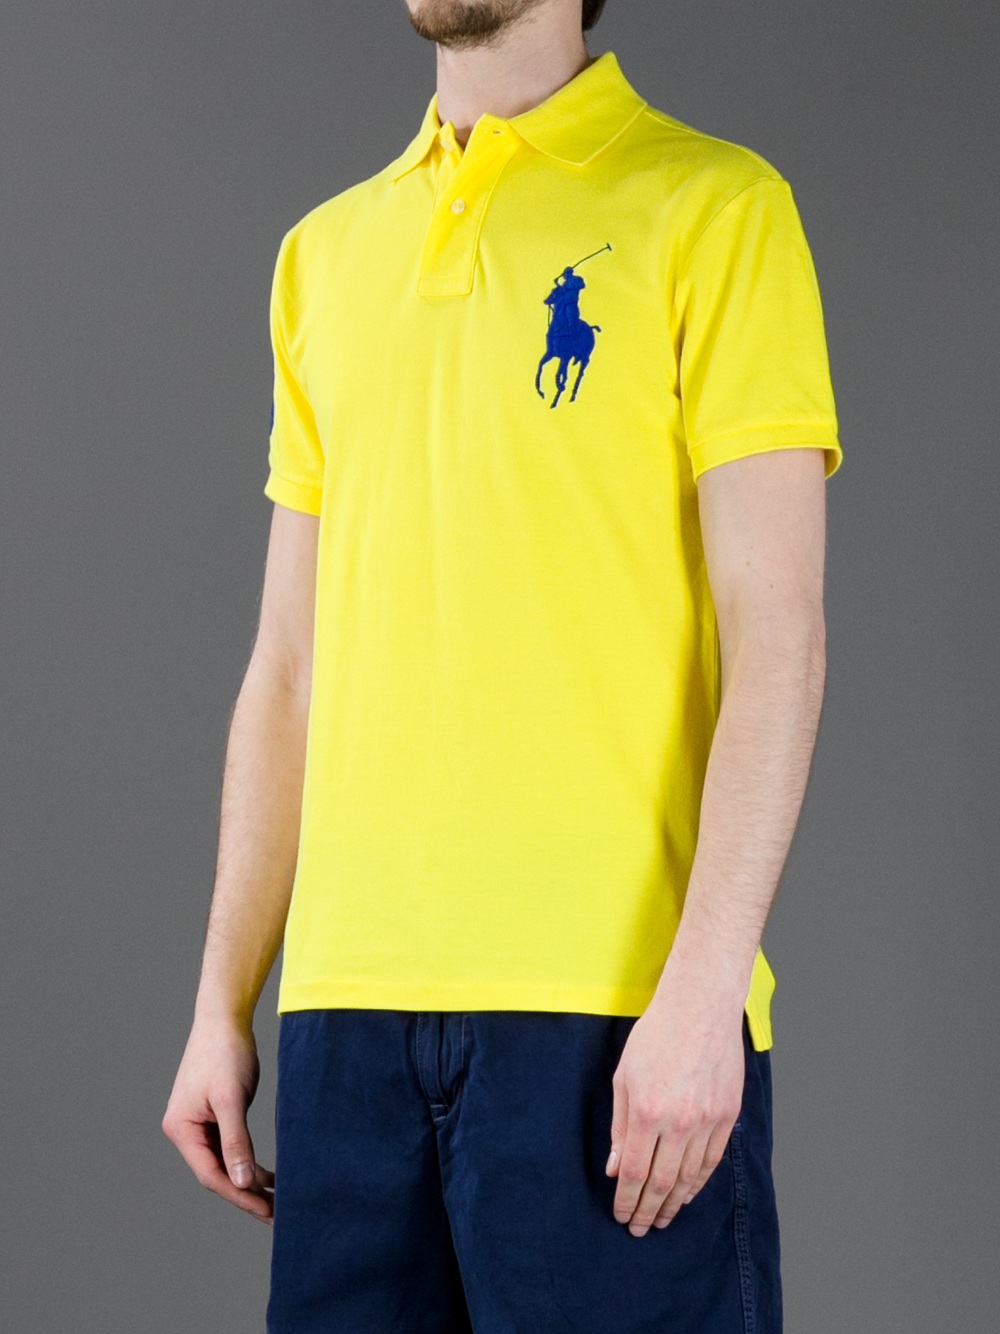 Polo Ralph Lauren Big Pony Polo Shirt in Yellow for Men - Lyst